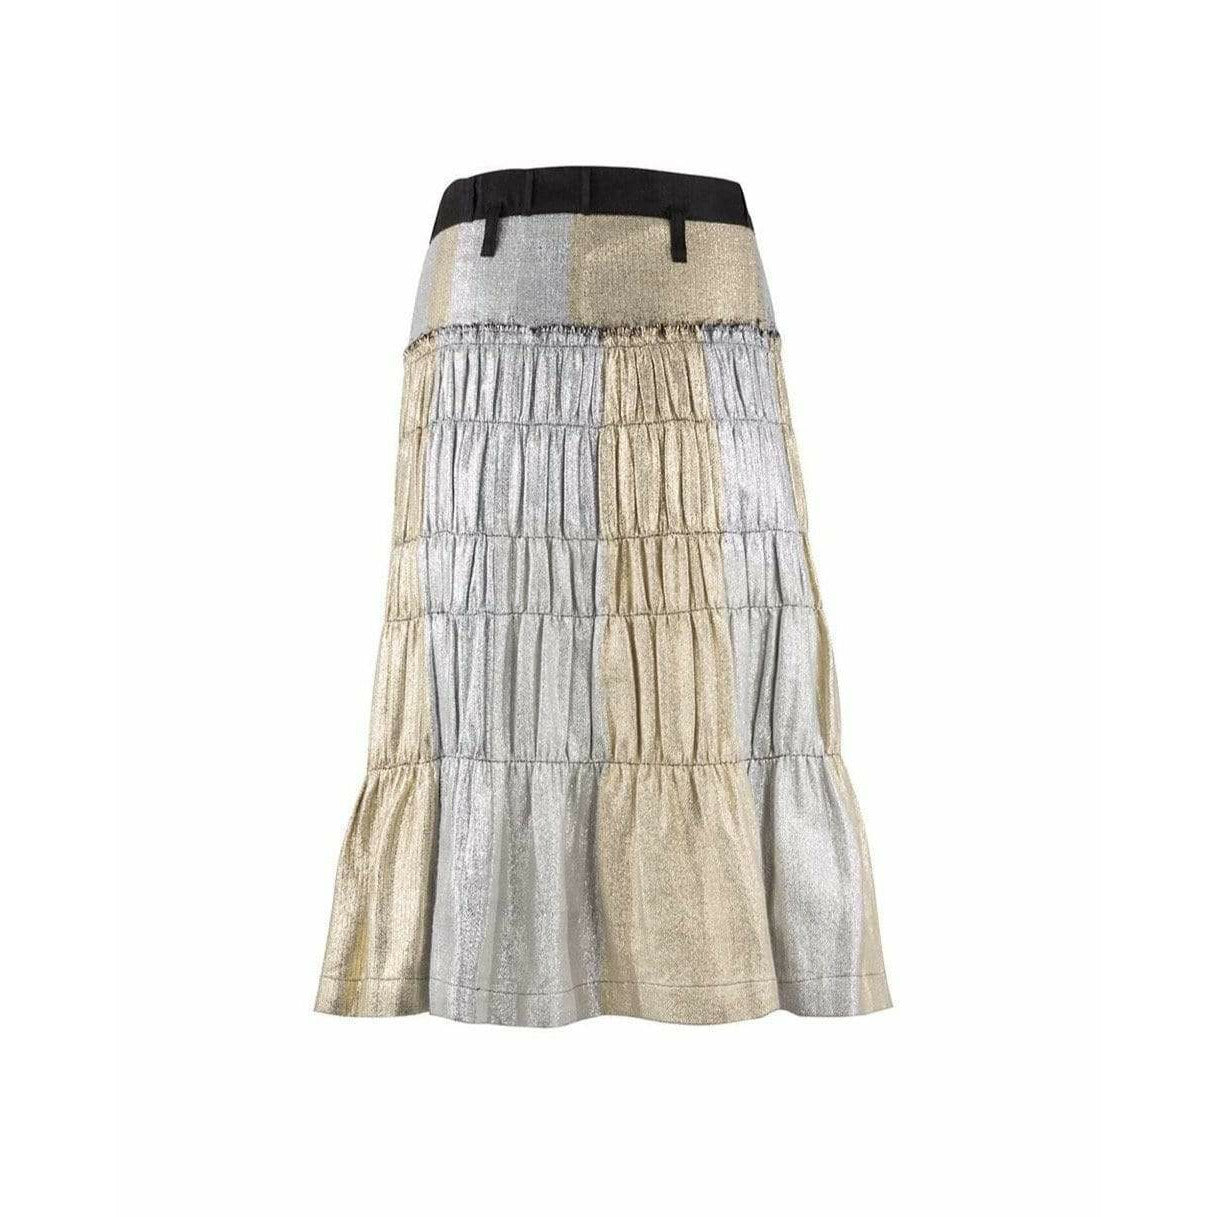 Skirts Tao Comme des Garçons Gold and Silver Pleated Wrap Skirt TAO